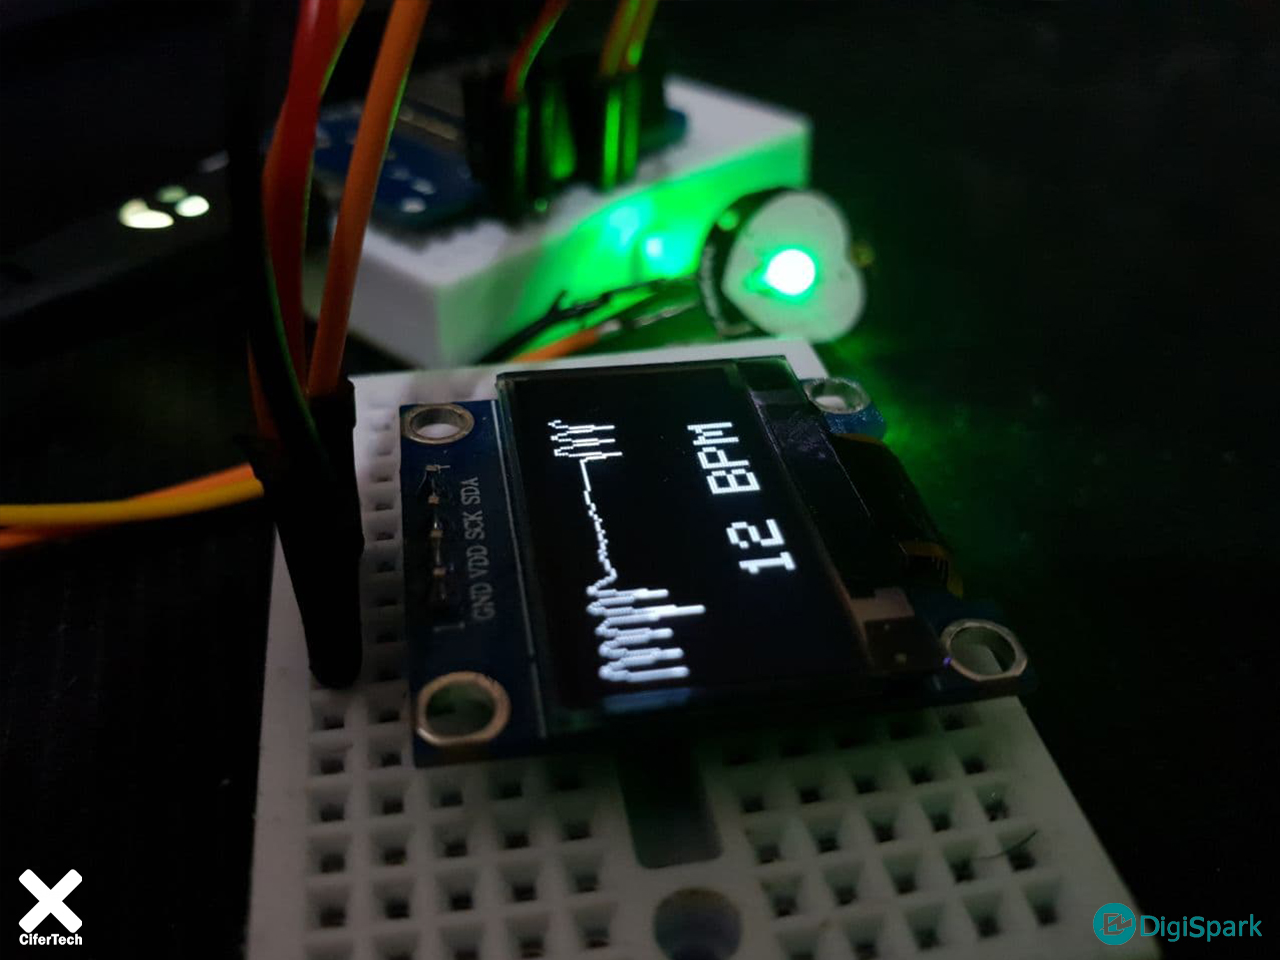 Making a simple ECG device with Pulse Sensor